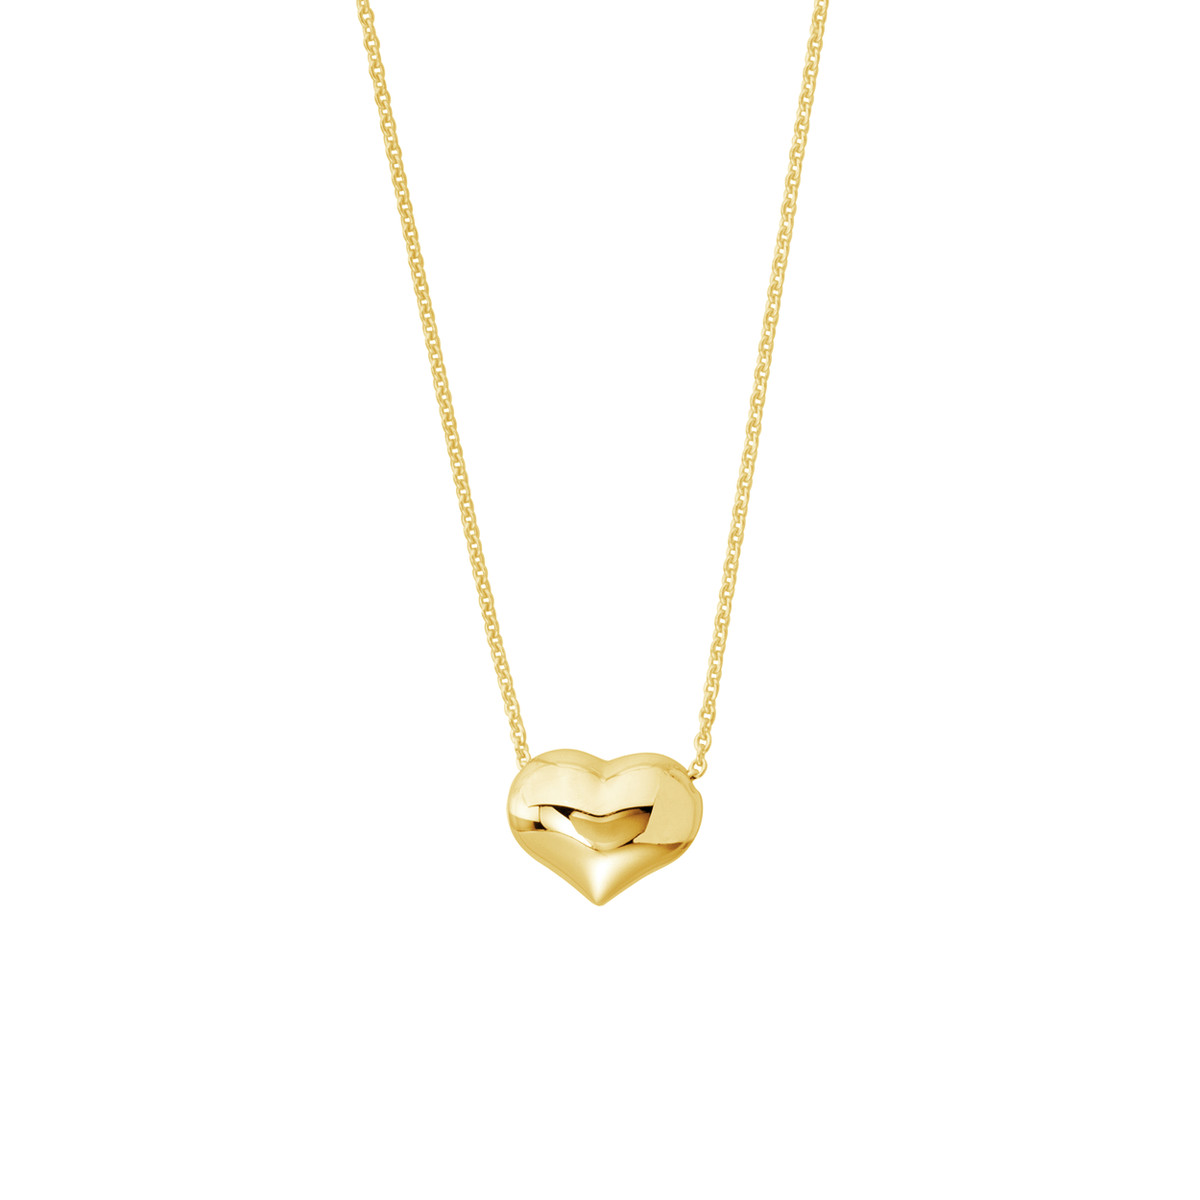 Korman Signature 14kt Yellow Gold Puffy Heart Adjustable Necklace